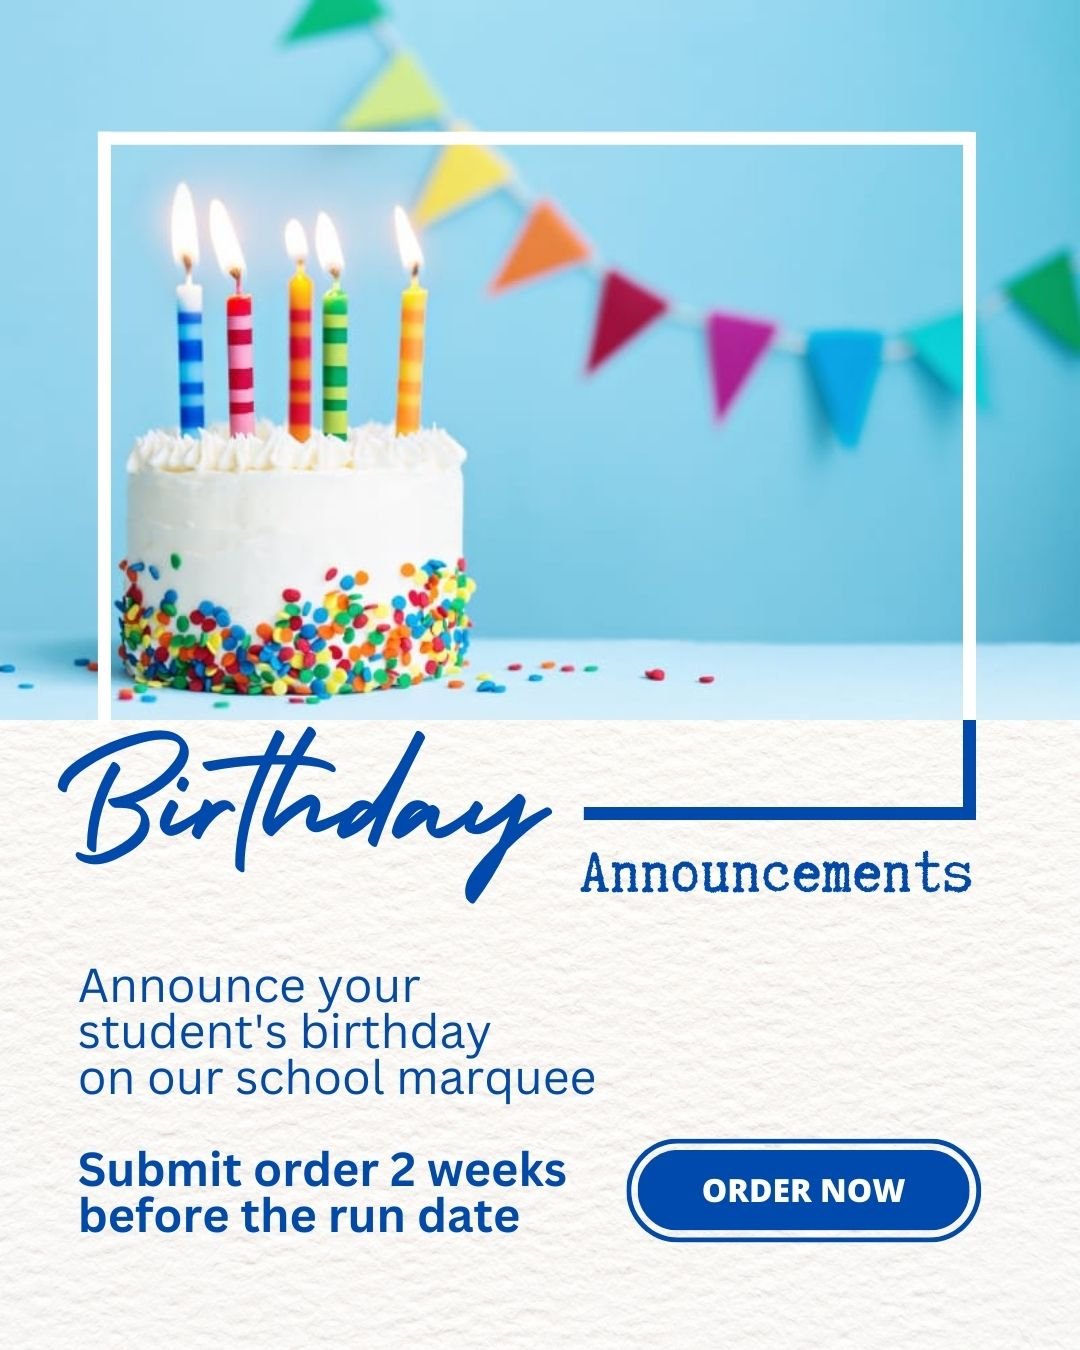 Birthday Announcements! - Hewes PTA